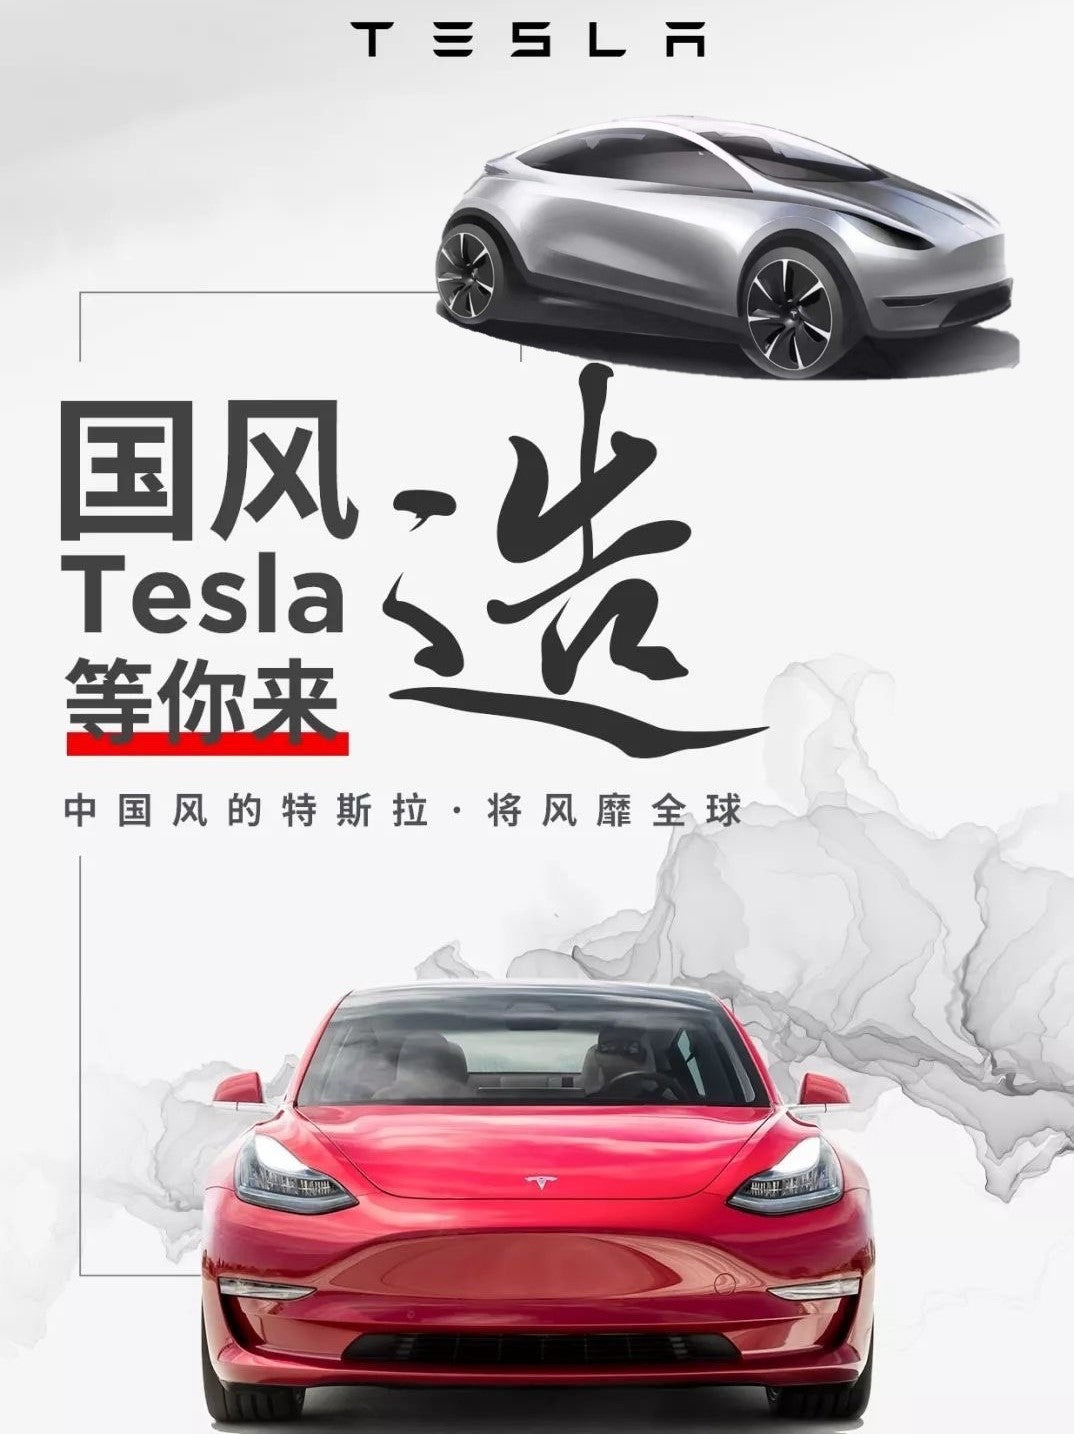 Tesla China Recruits Talents For Future Localize Models